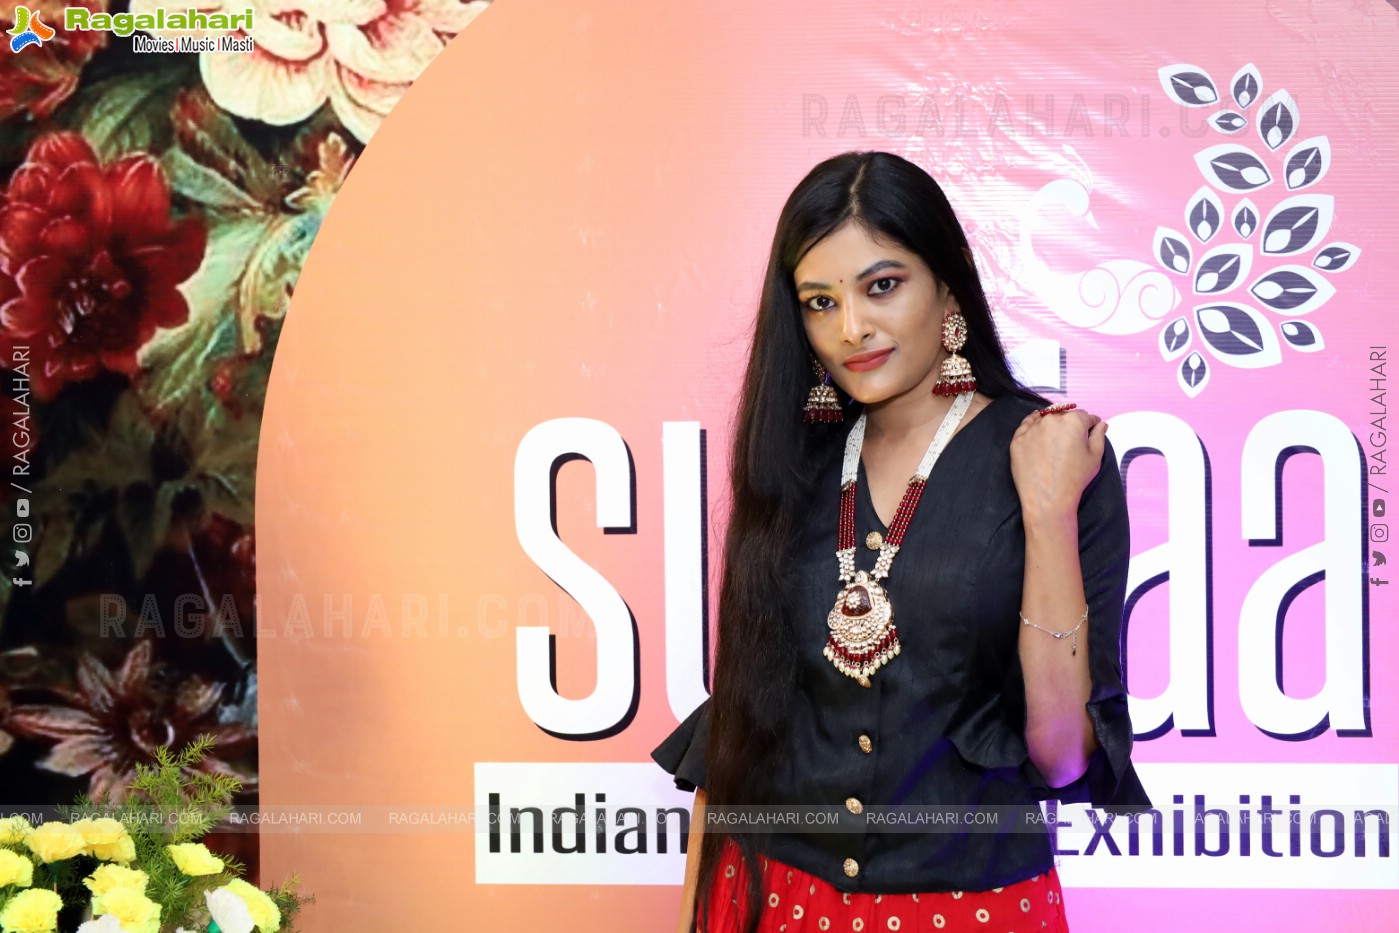 Sutraa Fashion Exhibition Inaugurated by Actress Tejaswi Madiwada at HICC-Novotel